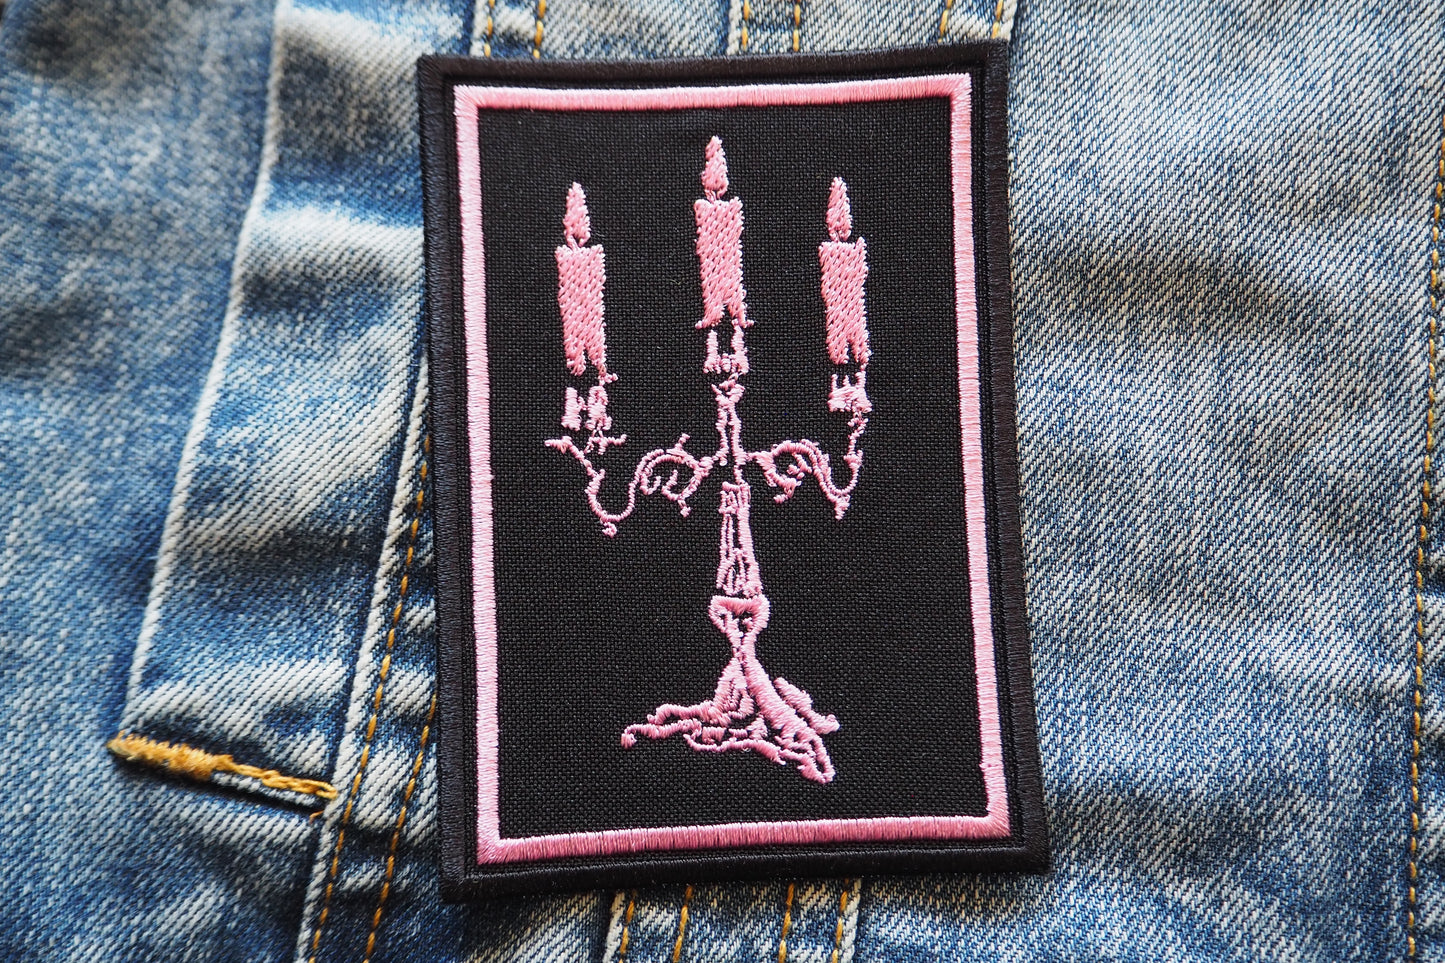 Raw Black Metal Funeral Candle Gothic Occult Patch